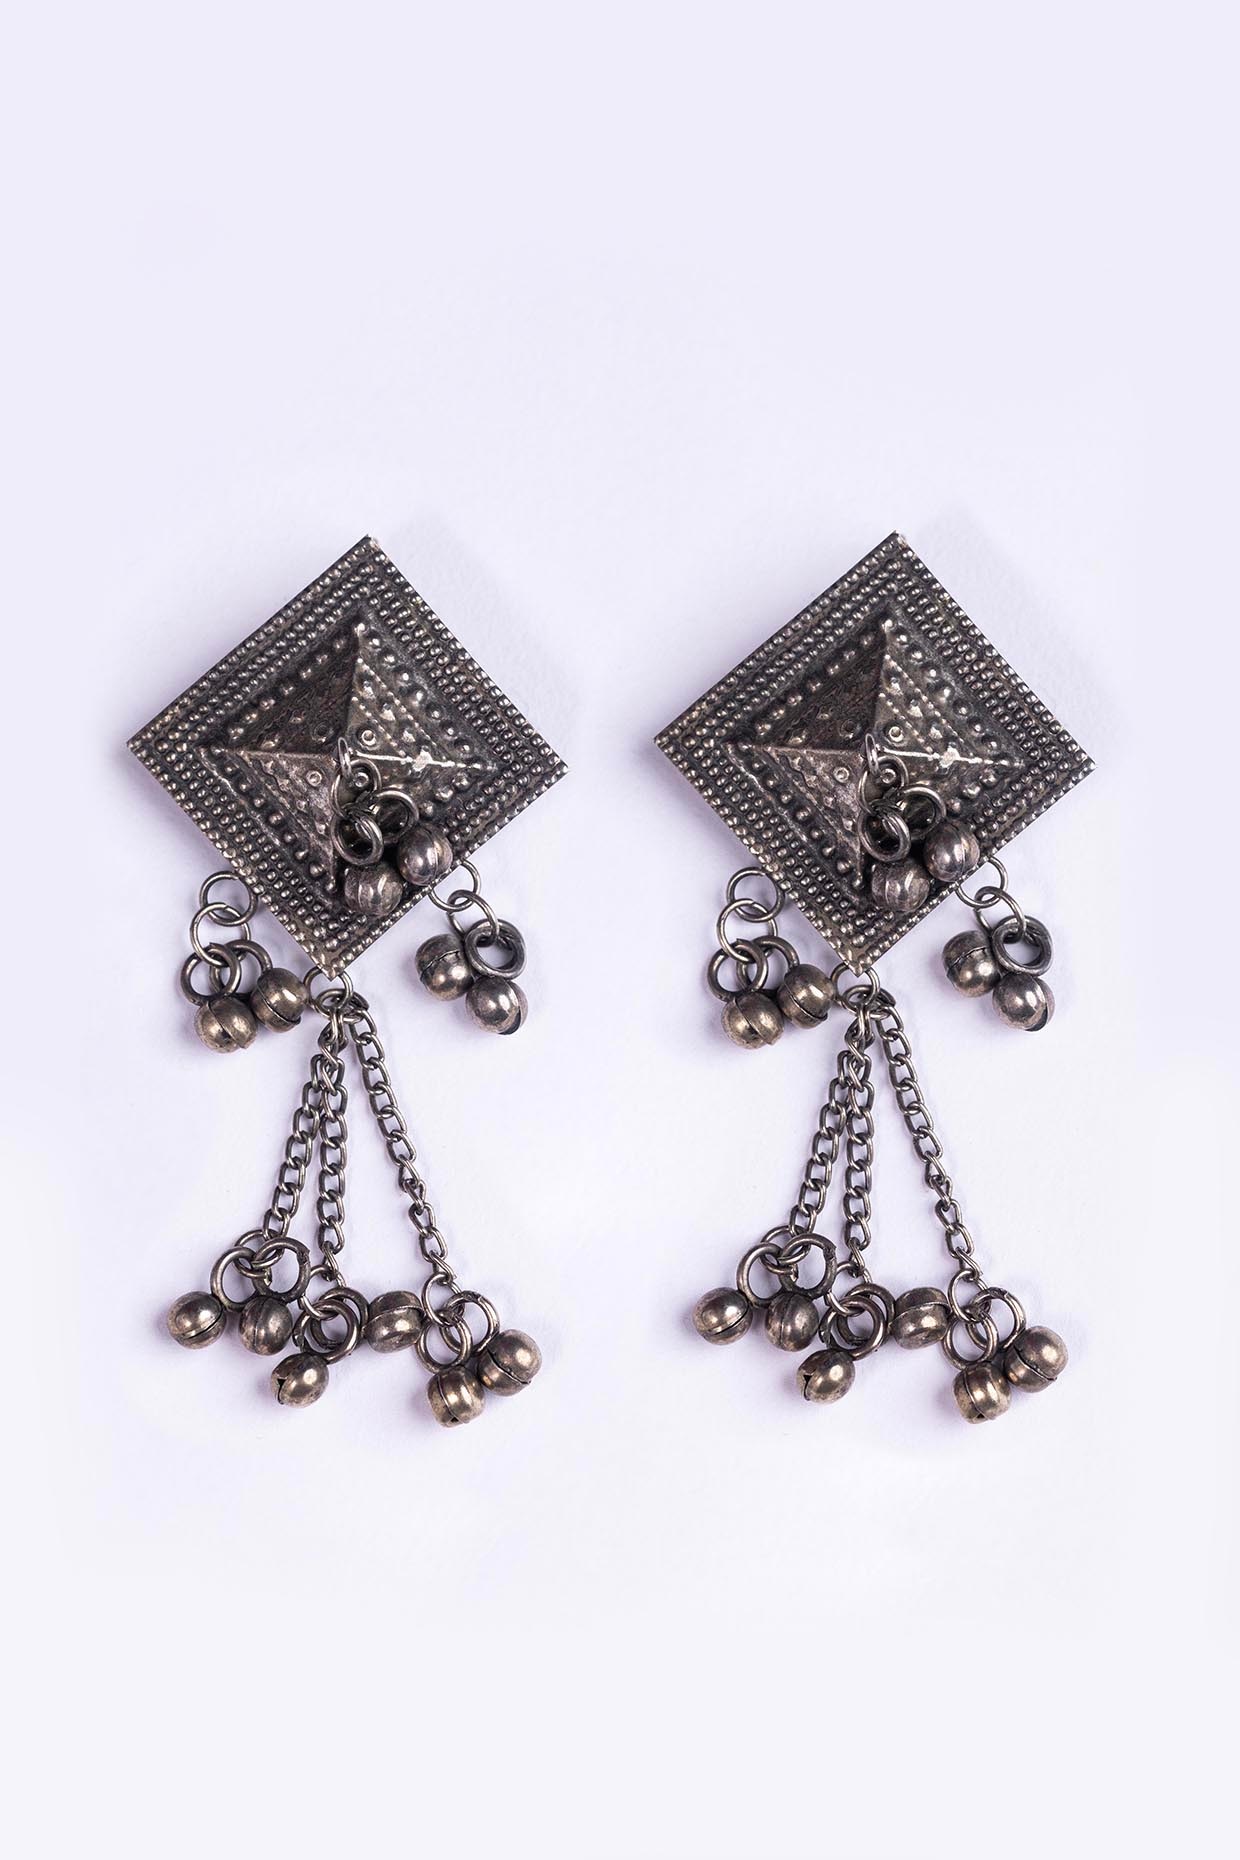 Discover 189+ oxidised square shape earrings best